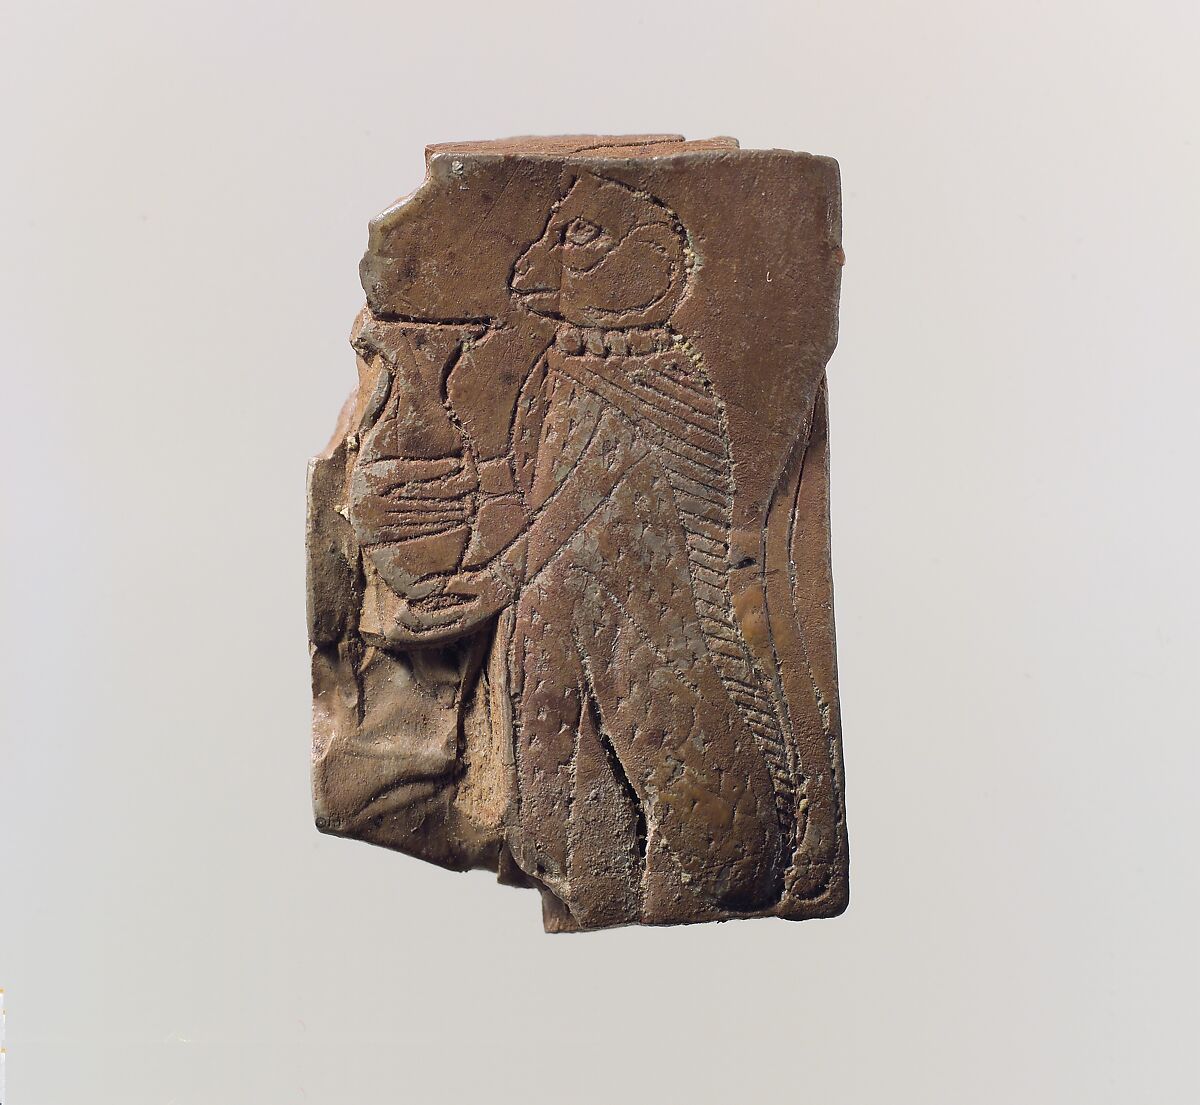 Furniture element with a monkey, Ivory, Old Assyrian Trading Colony